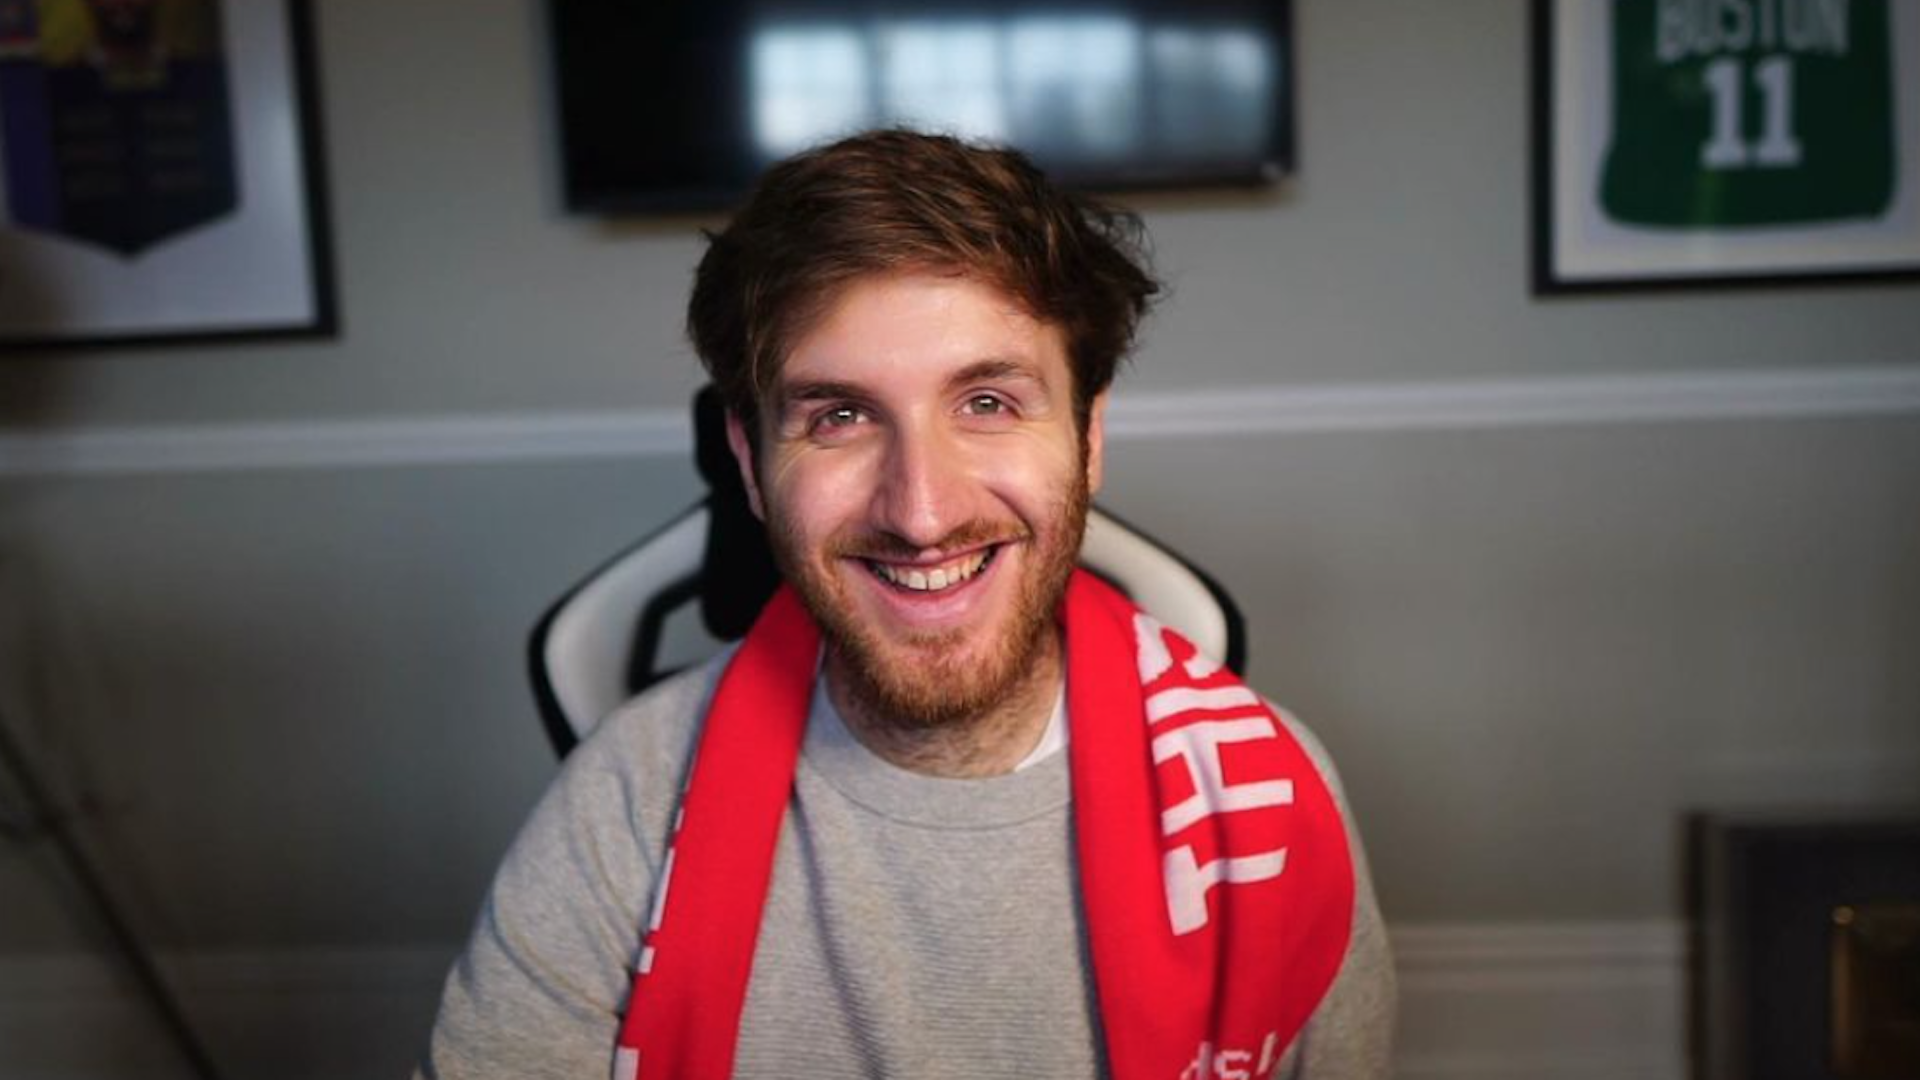 MattHDGamer in a red and white scarf